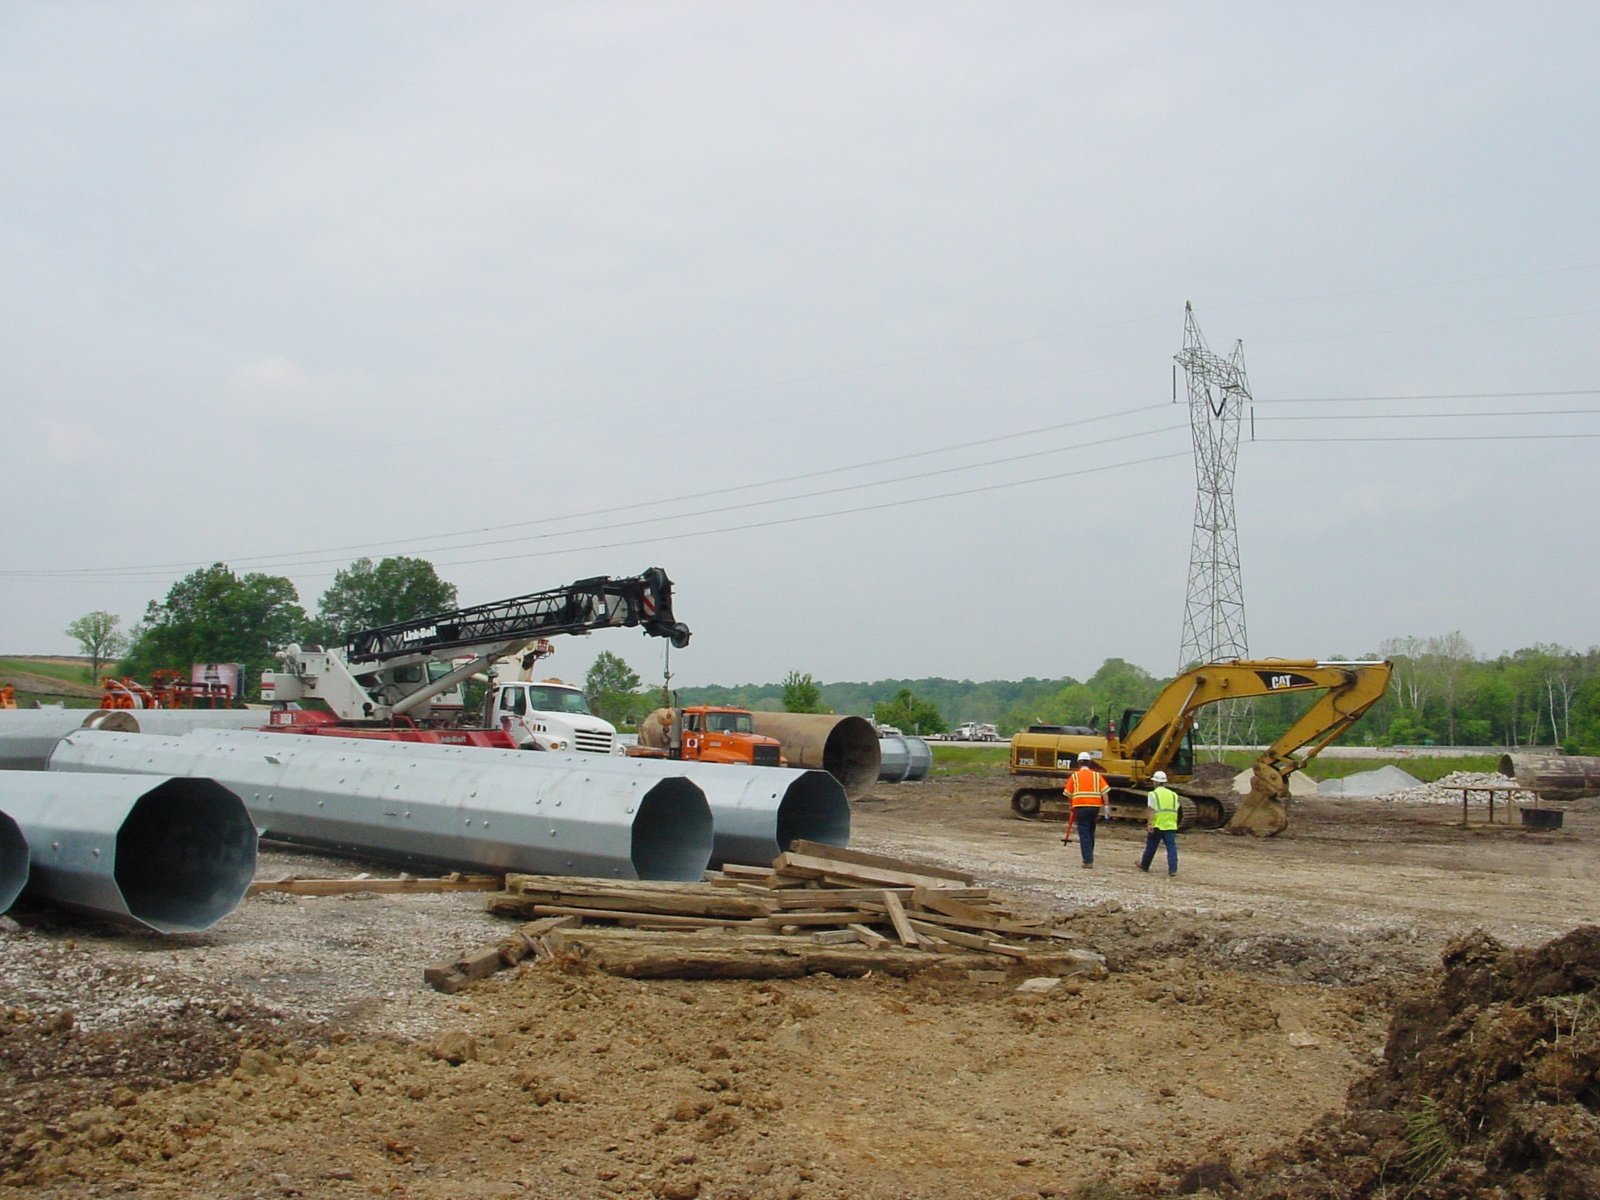 [Slideshare] Avoiding Environmental Impacts During the Interstate 69 Utility Relocation Project